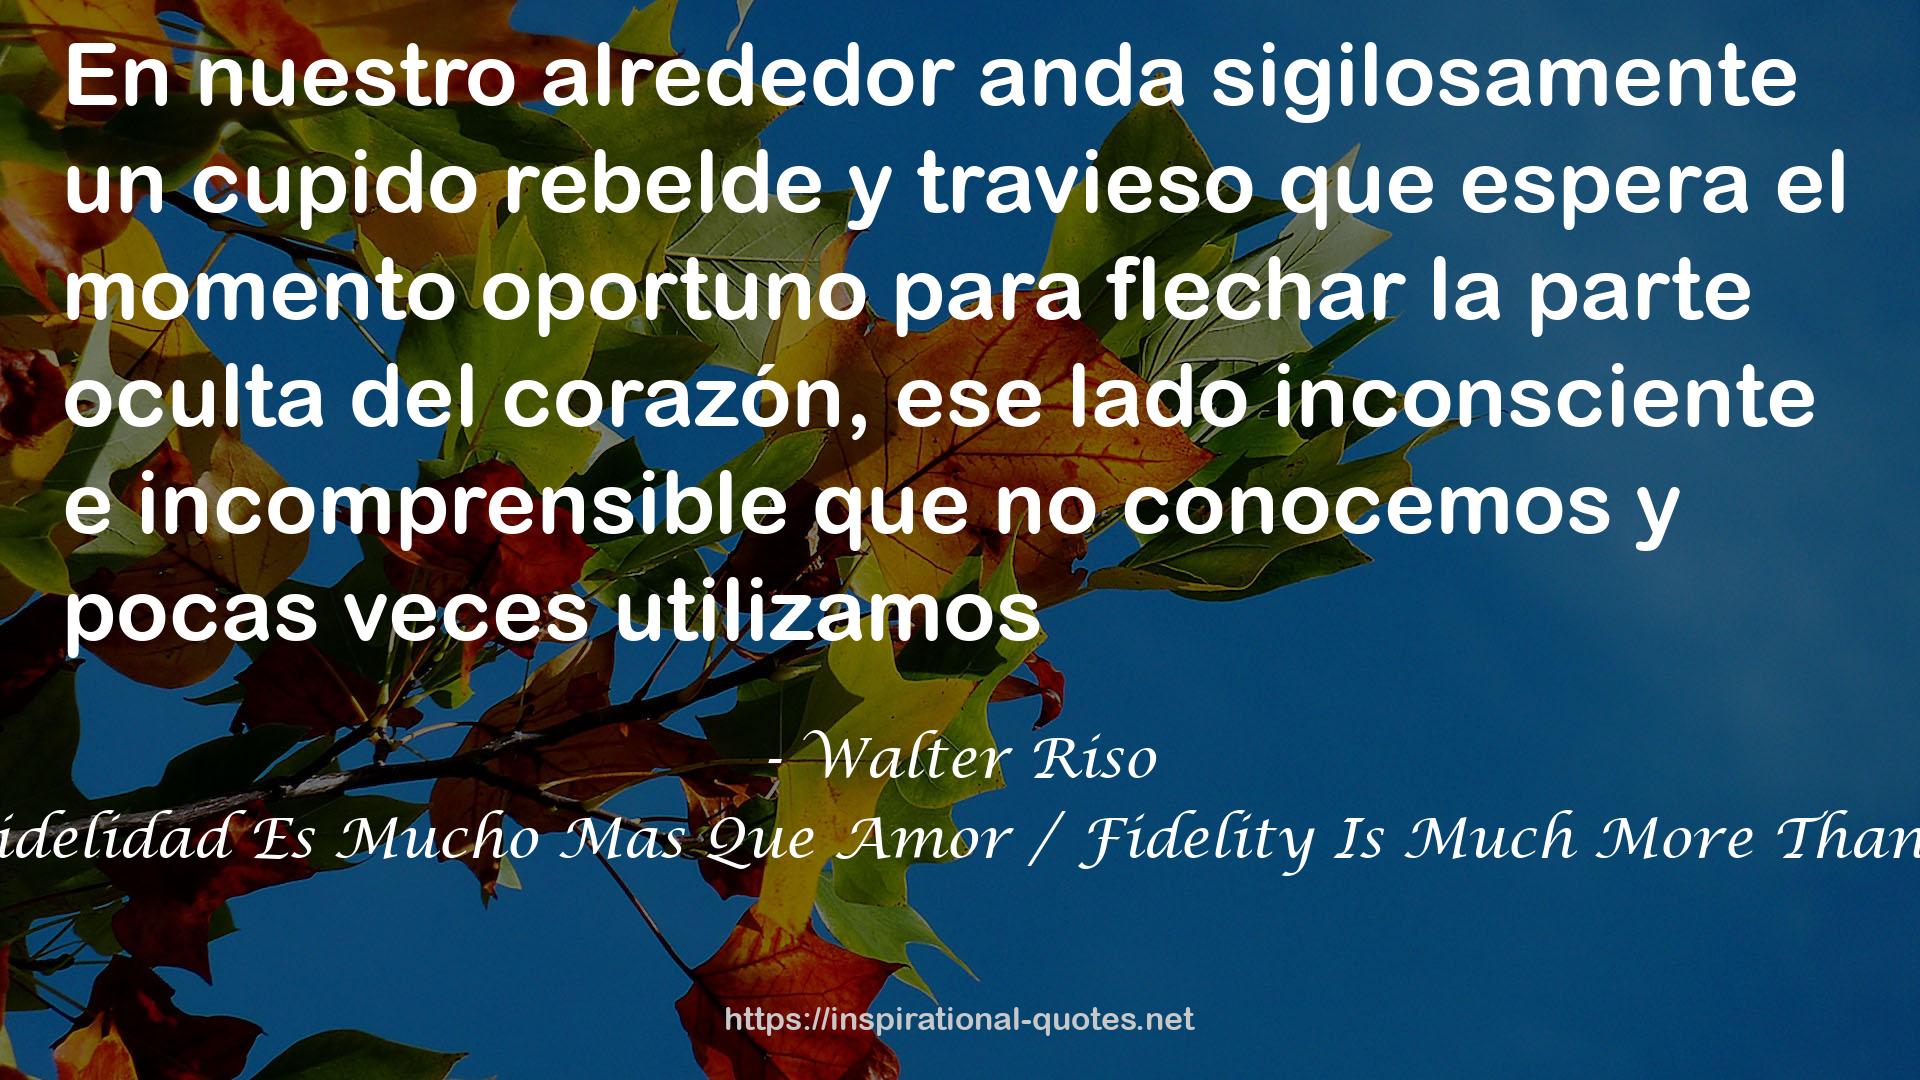 LA Fidelidad Es Mucho Mas Que Amor / Fidelity Is Much More Than Love QUOTES